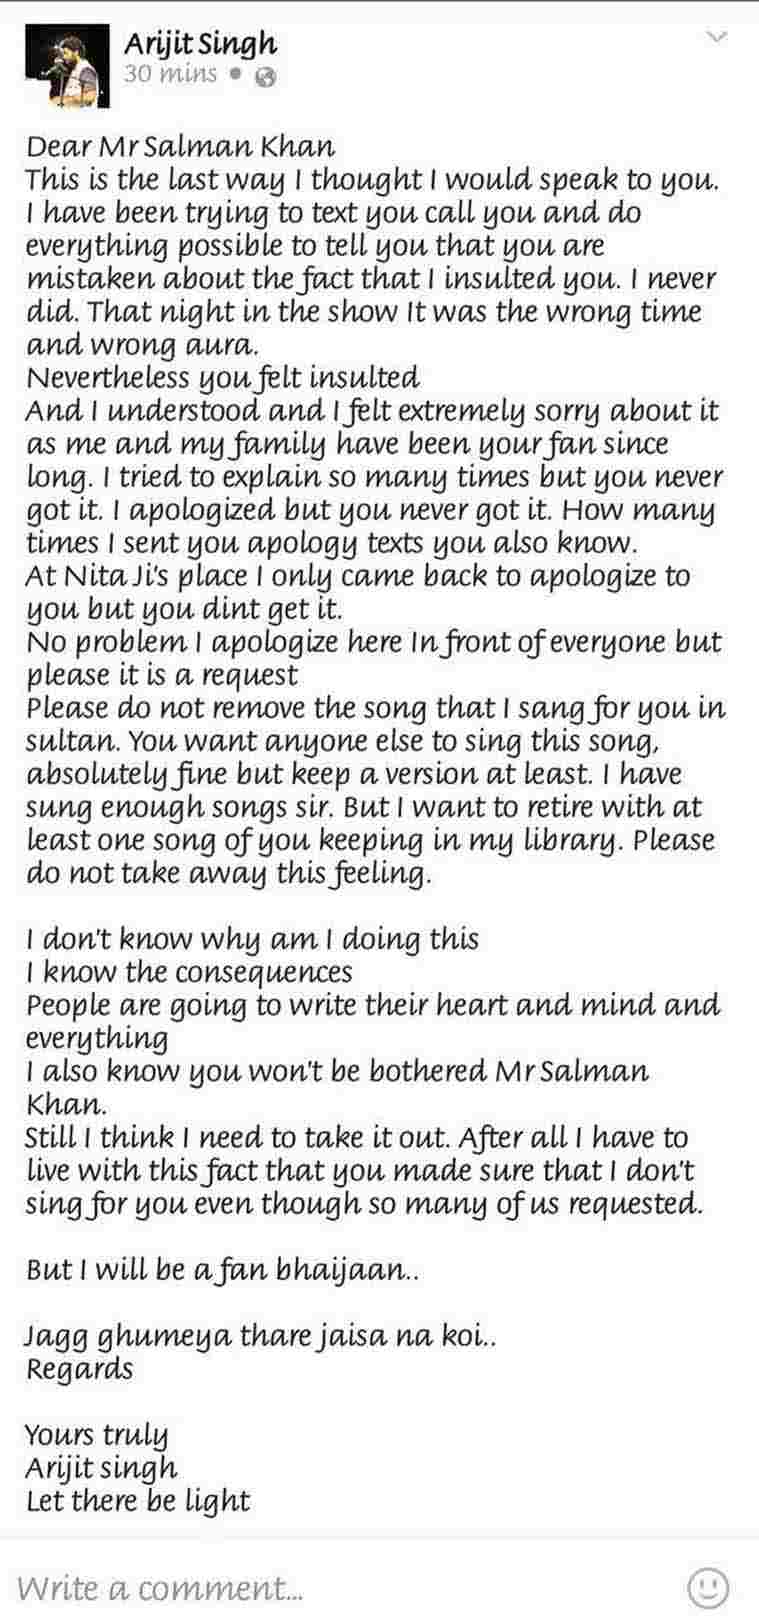 Arijit Singh publicly apologizes to Salman Khan on Facebook; begs him to retain his song in 'Sultan